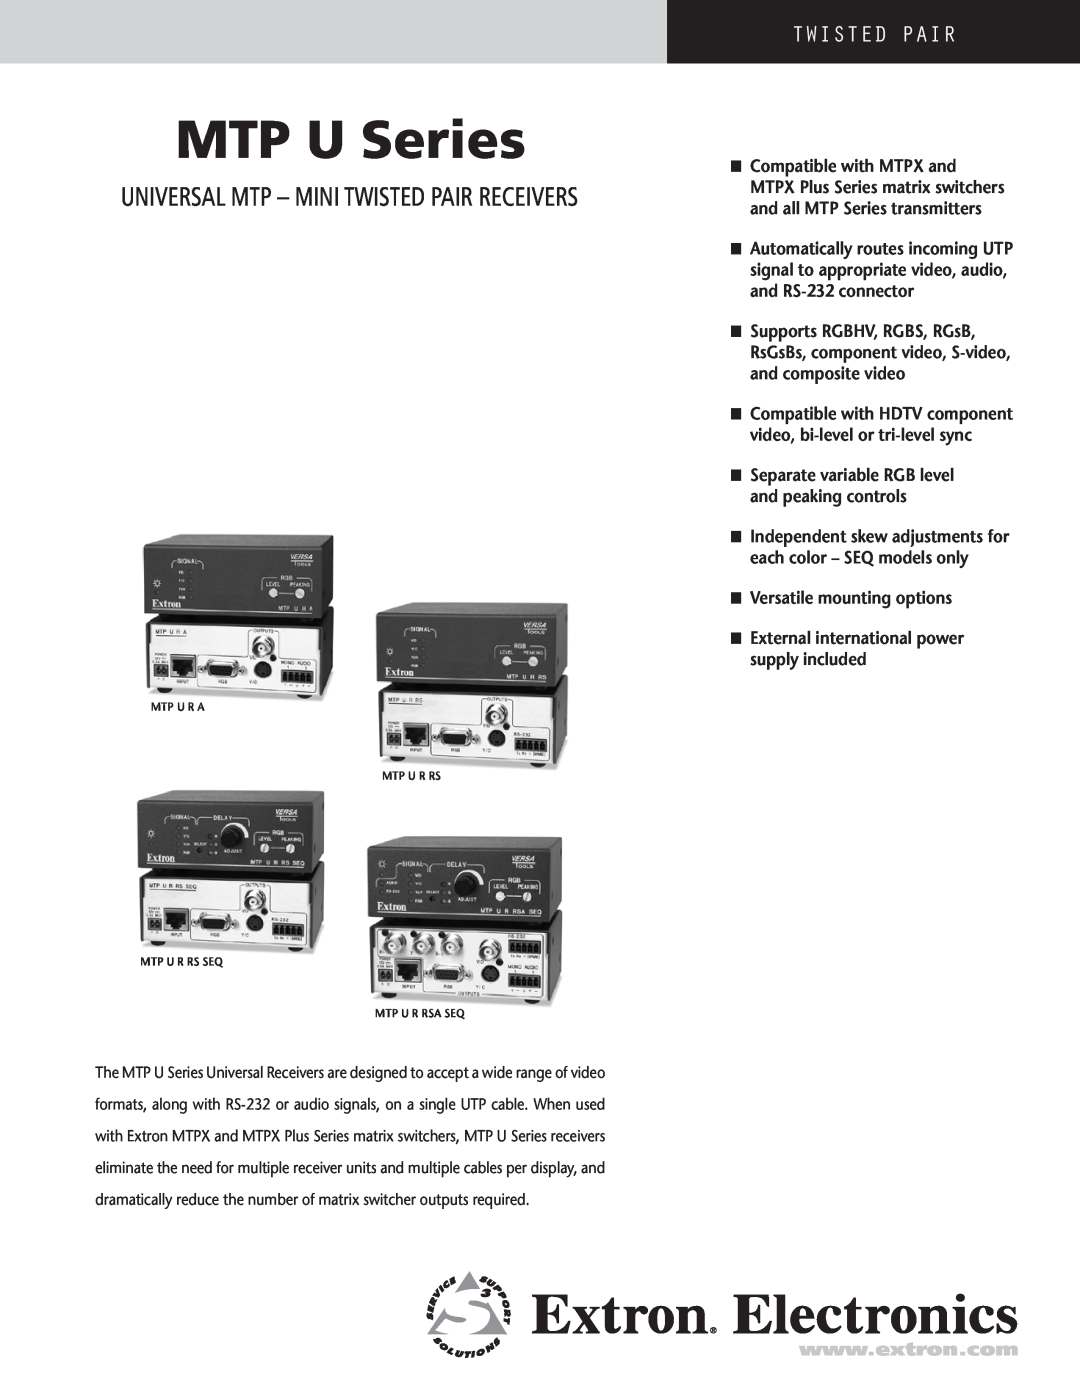 Extron electronic MTP U Series manual Universal MTP - Mini Twisted Pair Receivers, nVersatile mounting options 